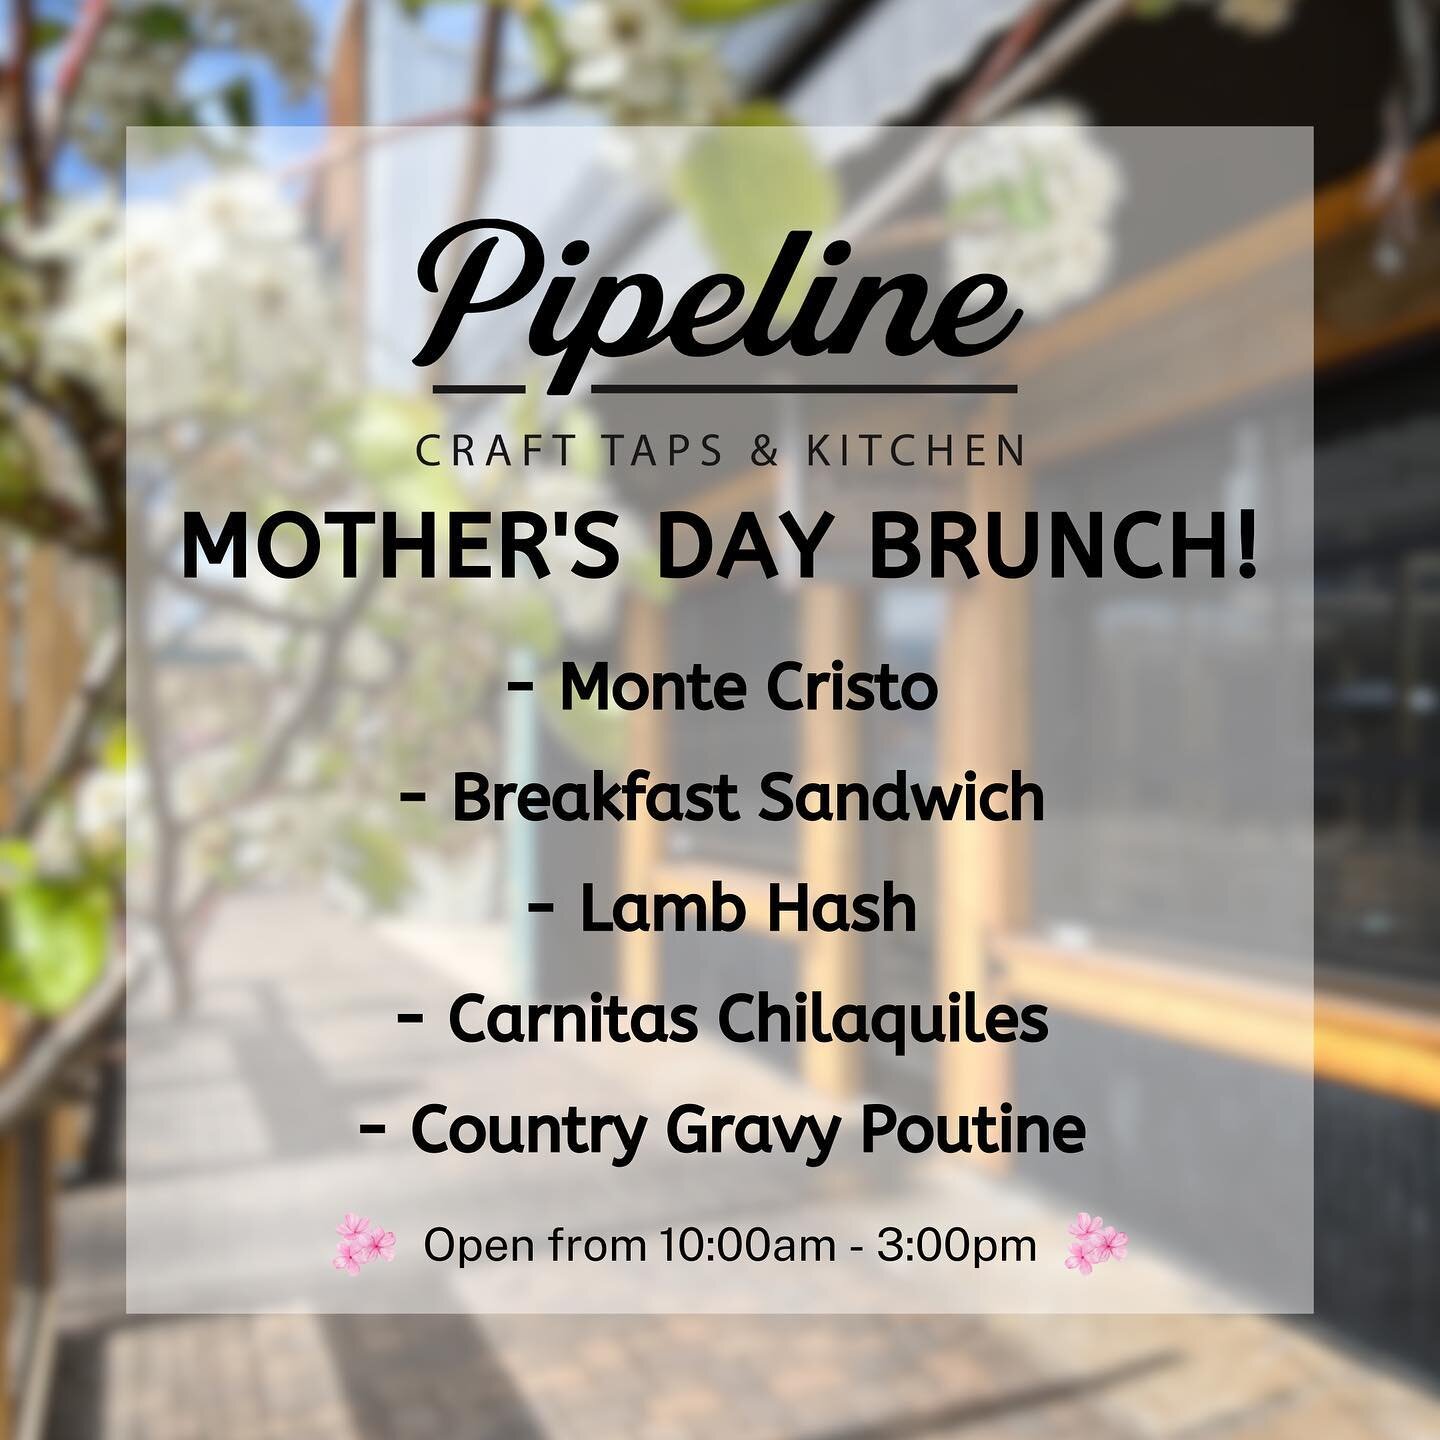 Tomorrow we will have a limited menu + Mother&rsquo;s Day specials! Come and join us!
We will be open from 10:00am - 3:00pm.